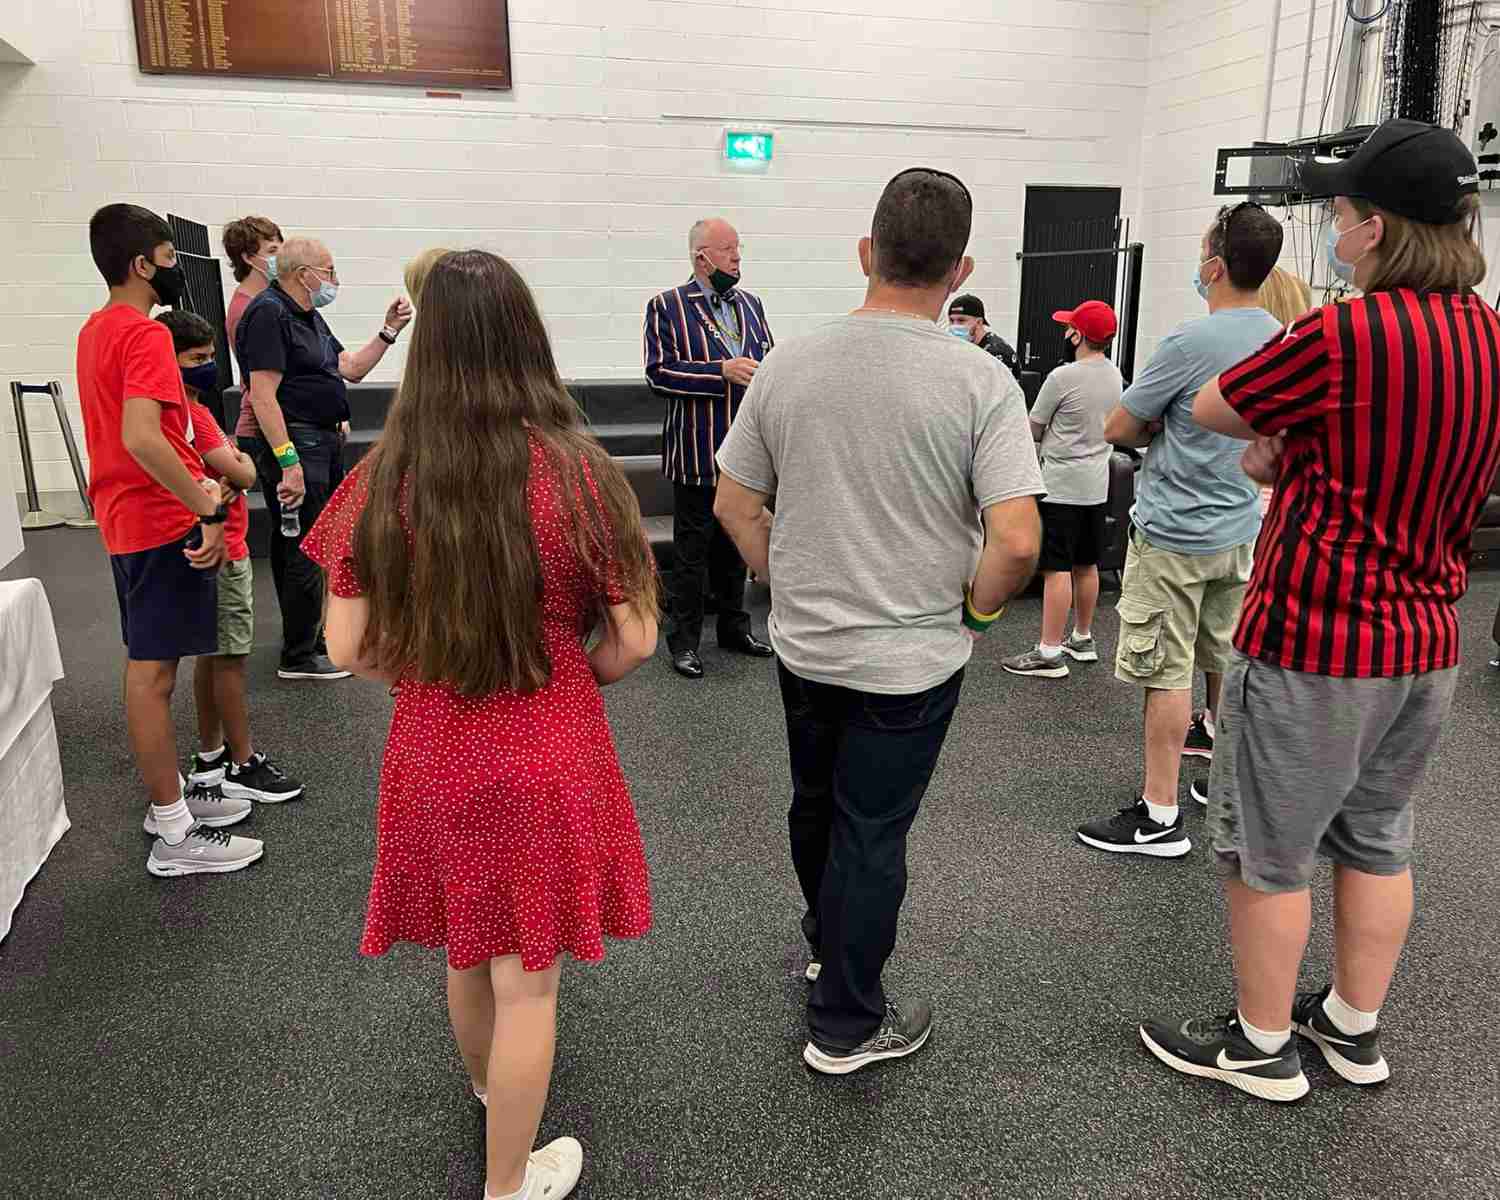 Exploring the change rooms on the MCG tour